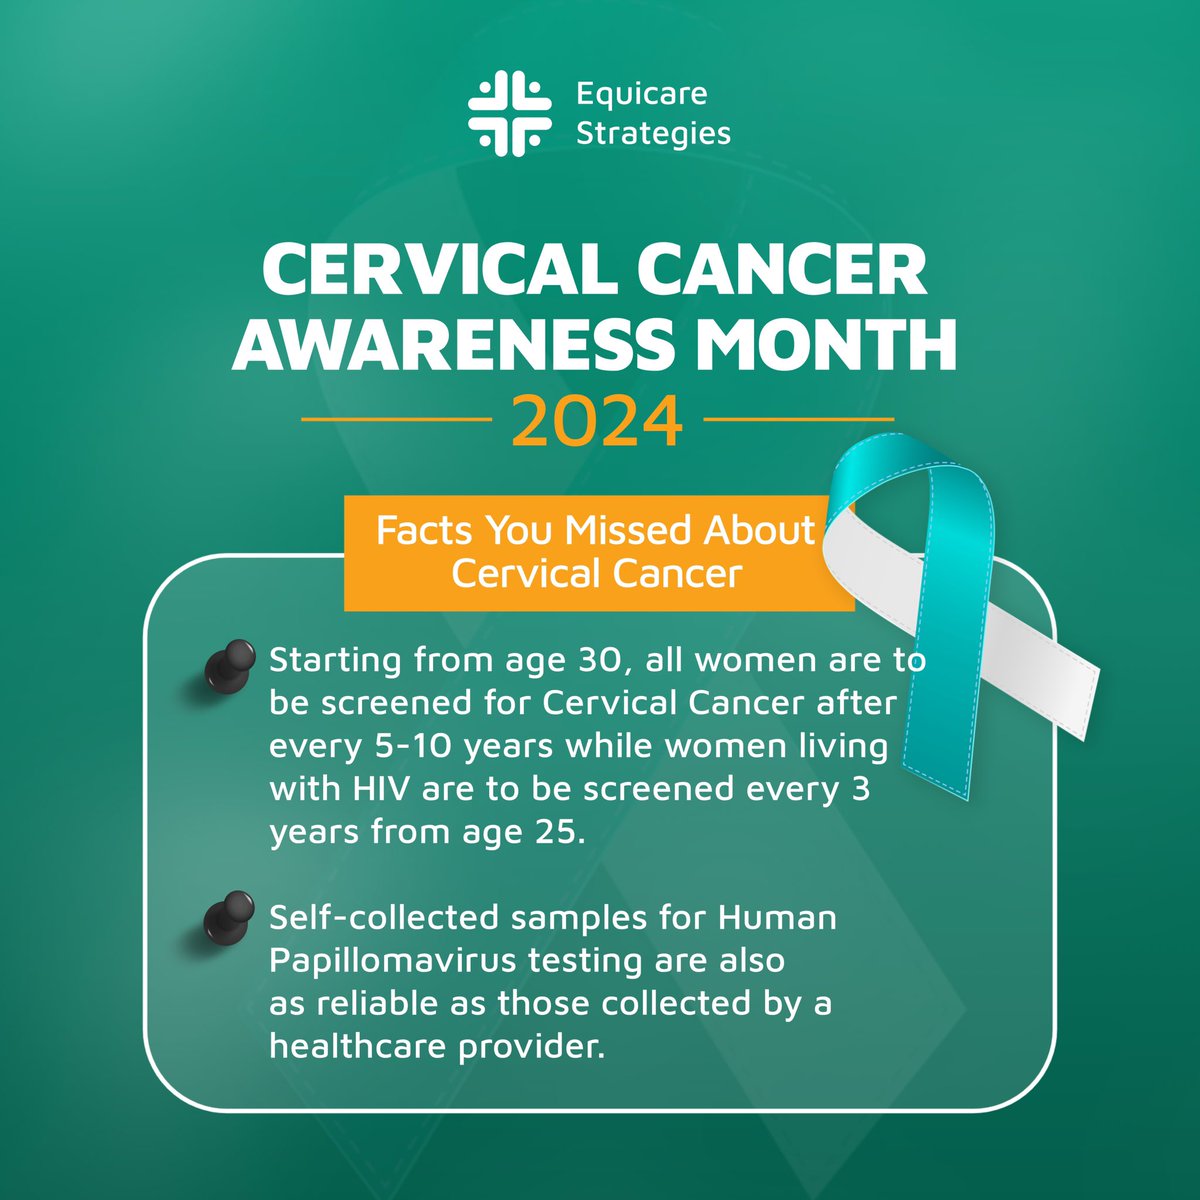 In commemoration of Cervical Cancer Awareness Month 2024, here are some key facts about cervical cancer you may not have known. 

Read, learn and share! 

#endcervicalcancer #hpv #cervicalcancerawarenessmonth